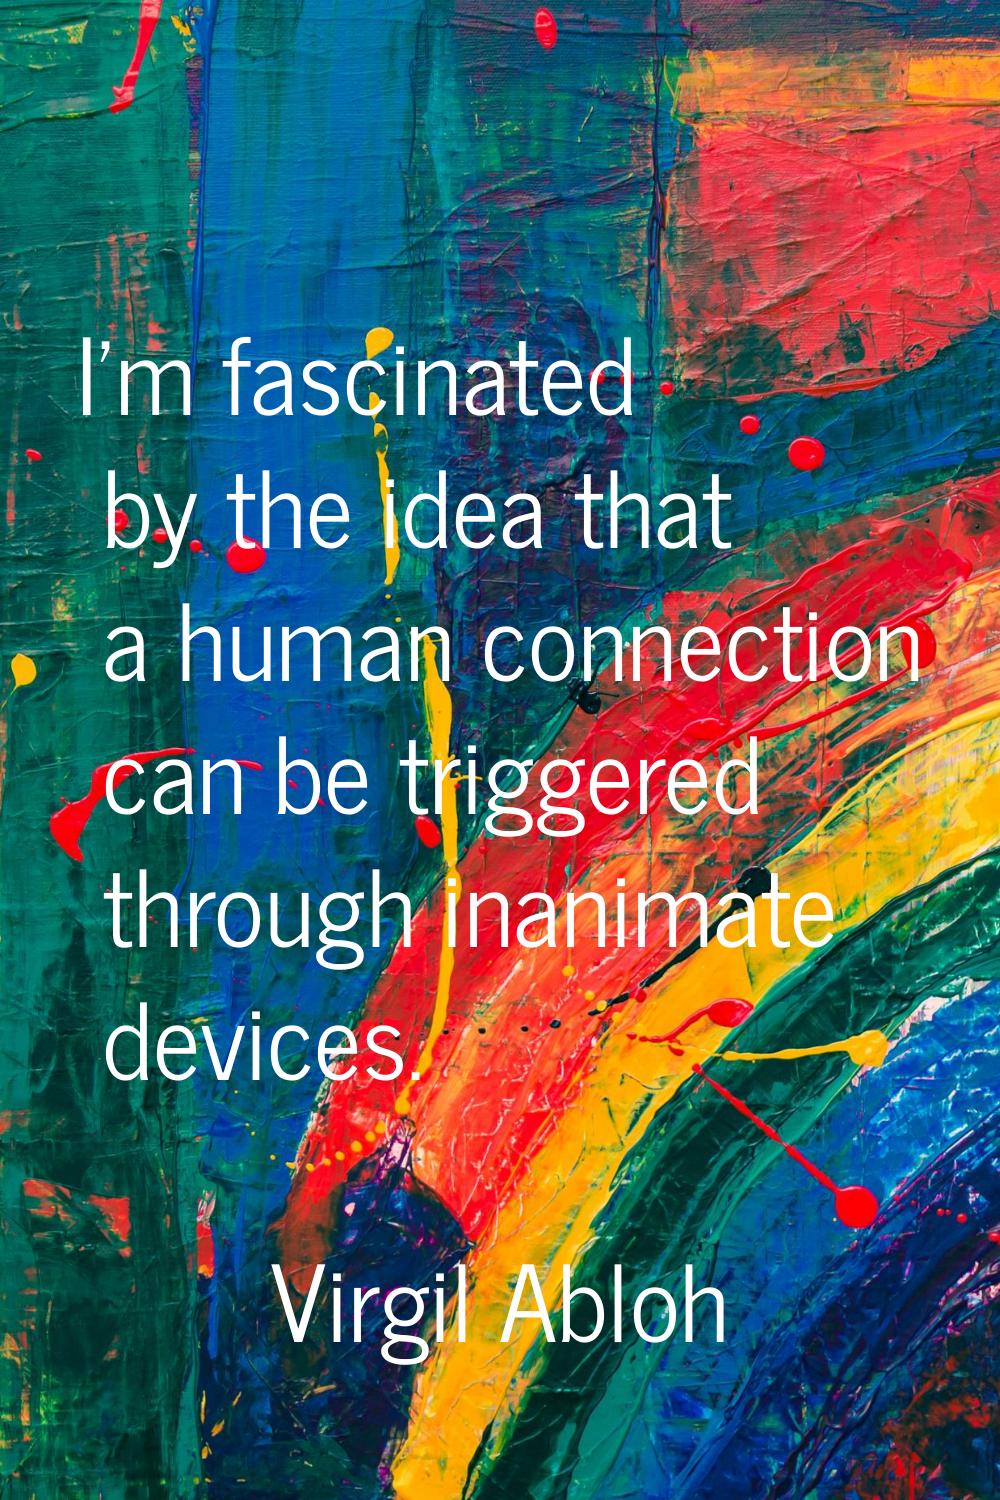 I'm fascinated by the idea that a human connection can be triggered through inanimate devices.